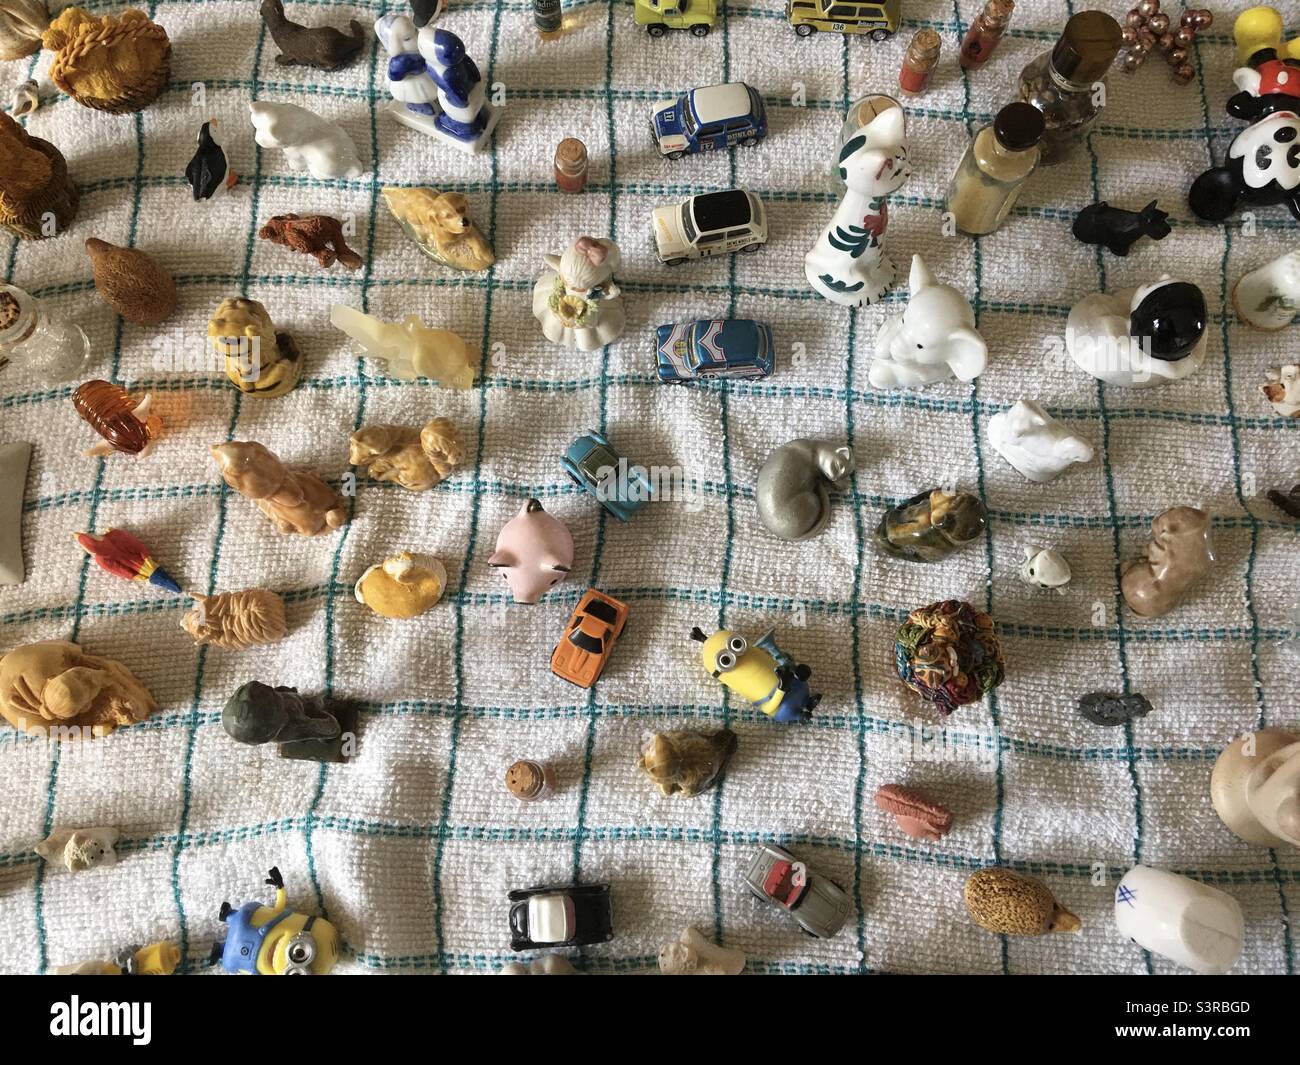 Miniature items from a printbox on a tea towel after spring cleaning and washing. Stock Photo